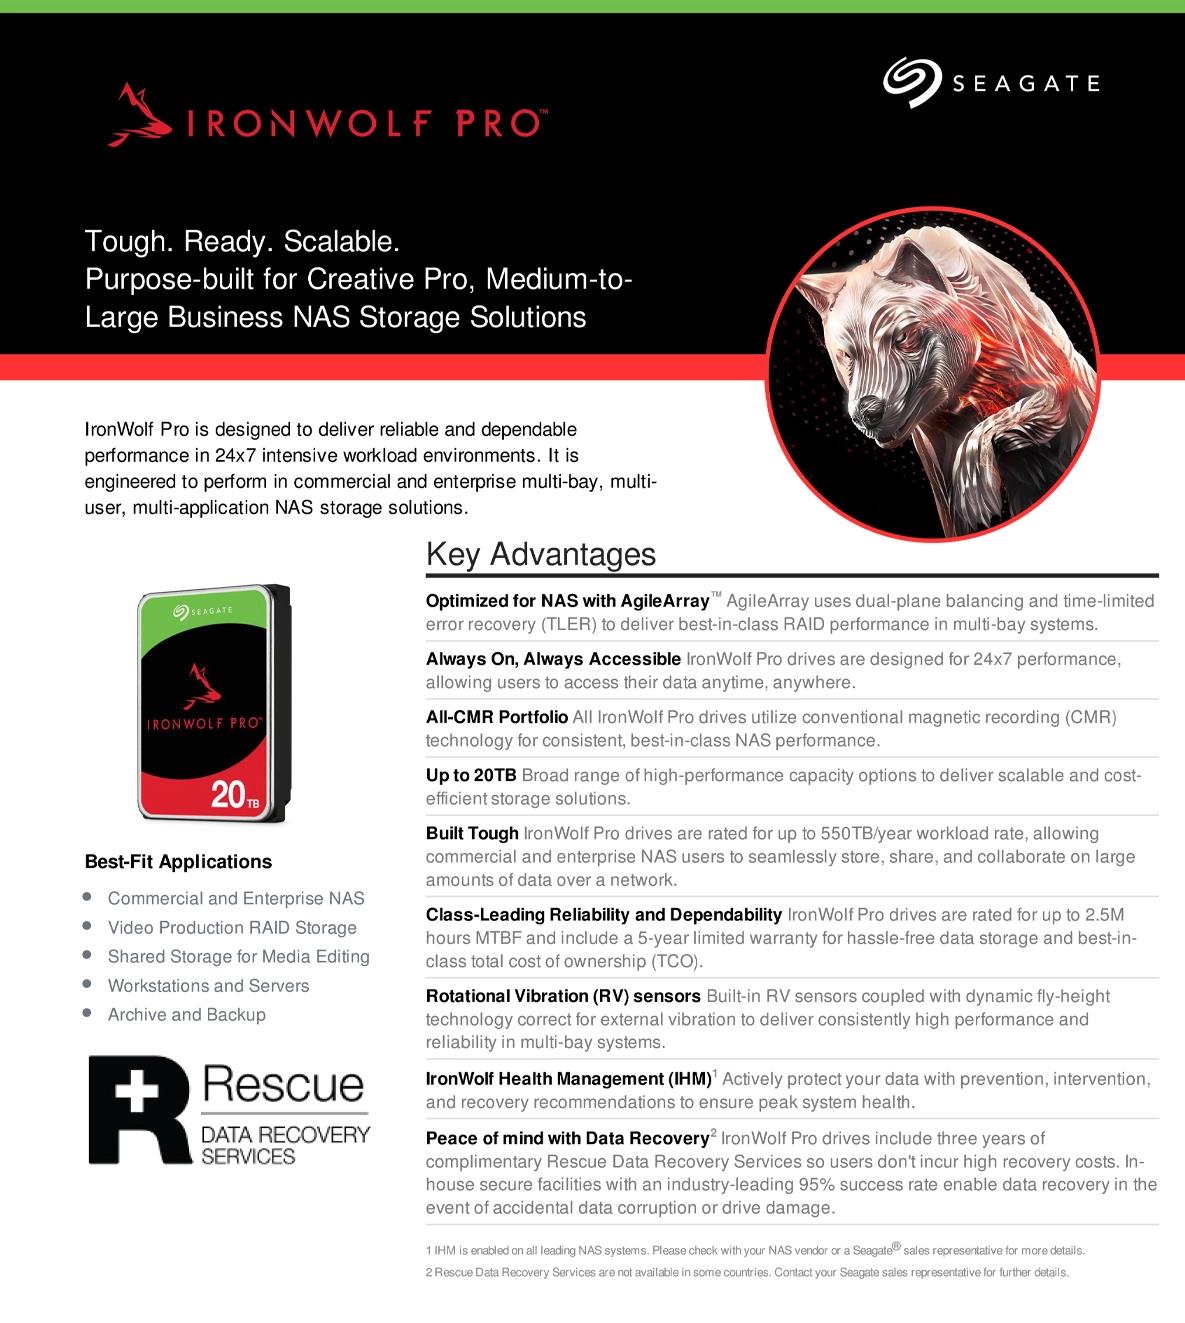 A large marketing image providing additional information about the product Seagate IronWolf Pro 3.5" NAS HDD - 6TB 256MB - Additional alt info not provided